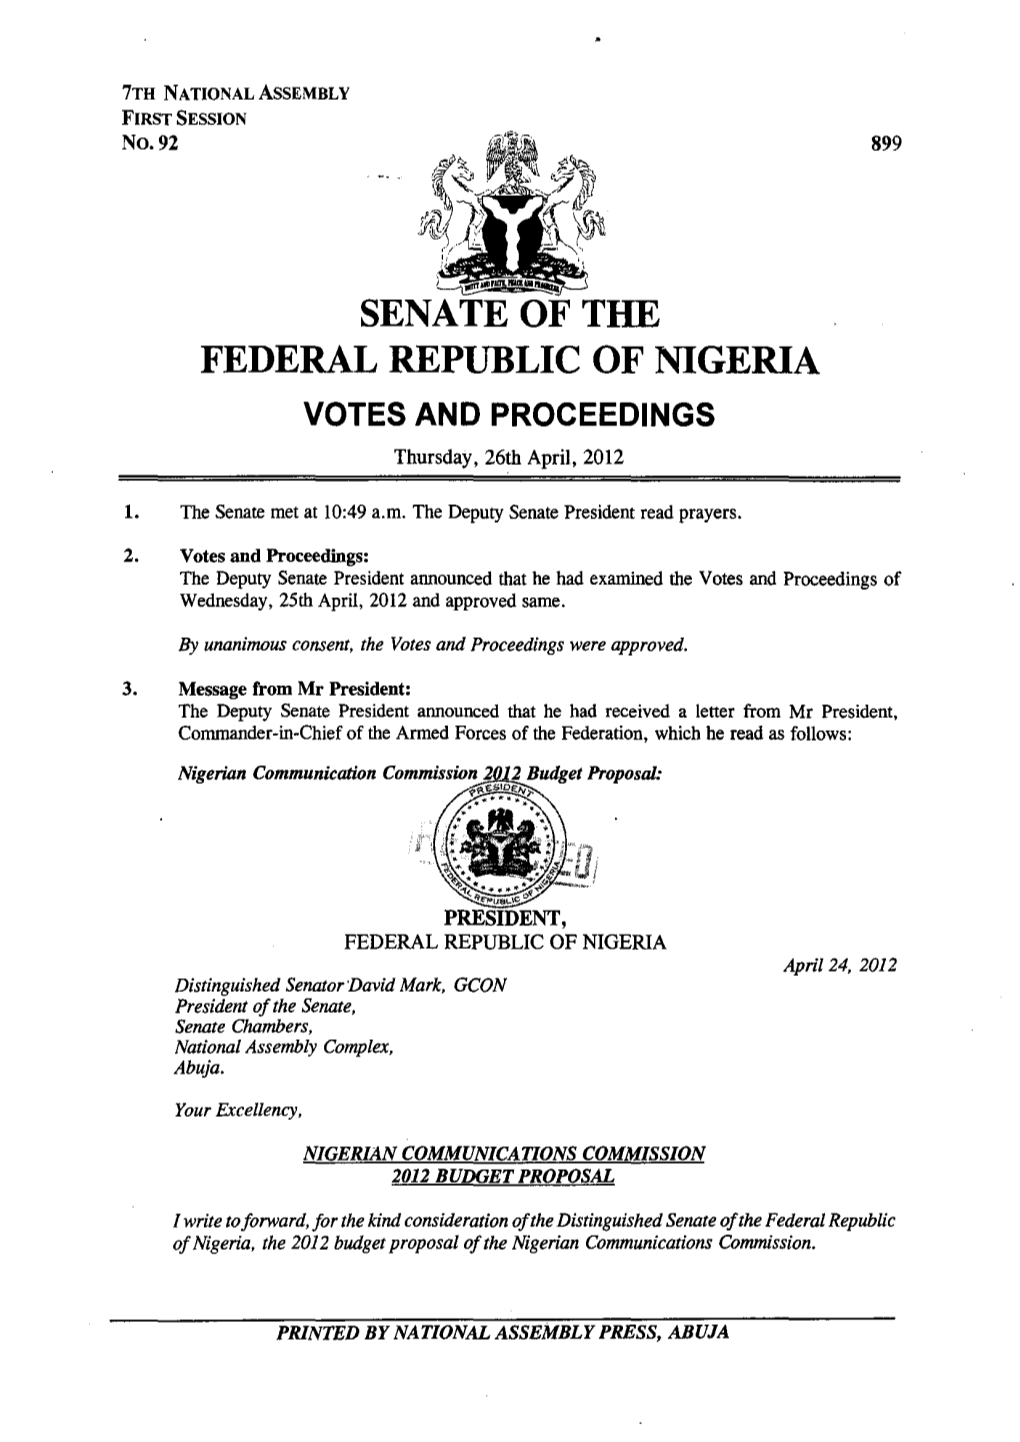 SENATE of the FEDERAL REPUBLIC of NIGERIA VOTES and PROCEEDINGS Thursday, 26Th April, 2012